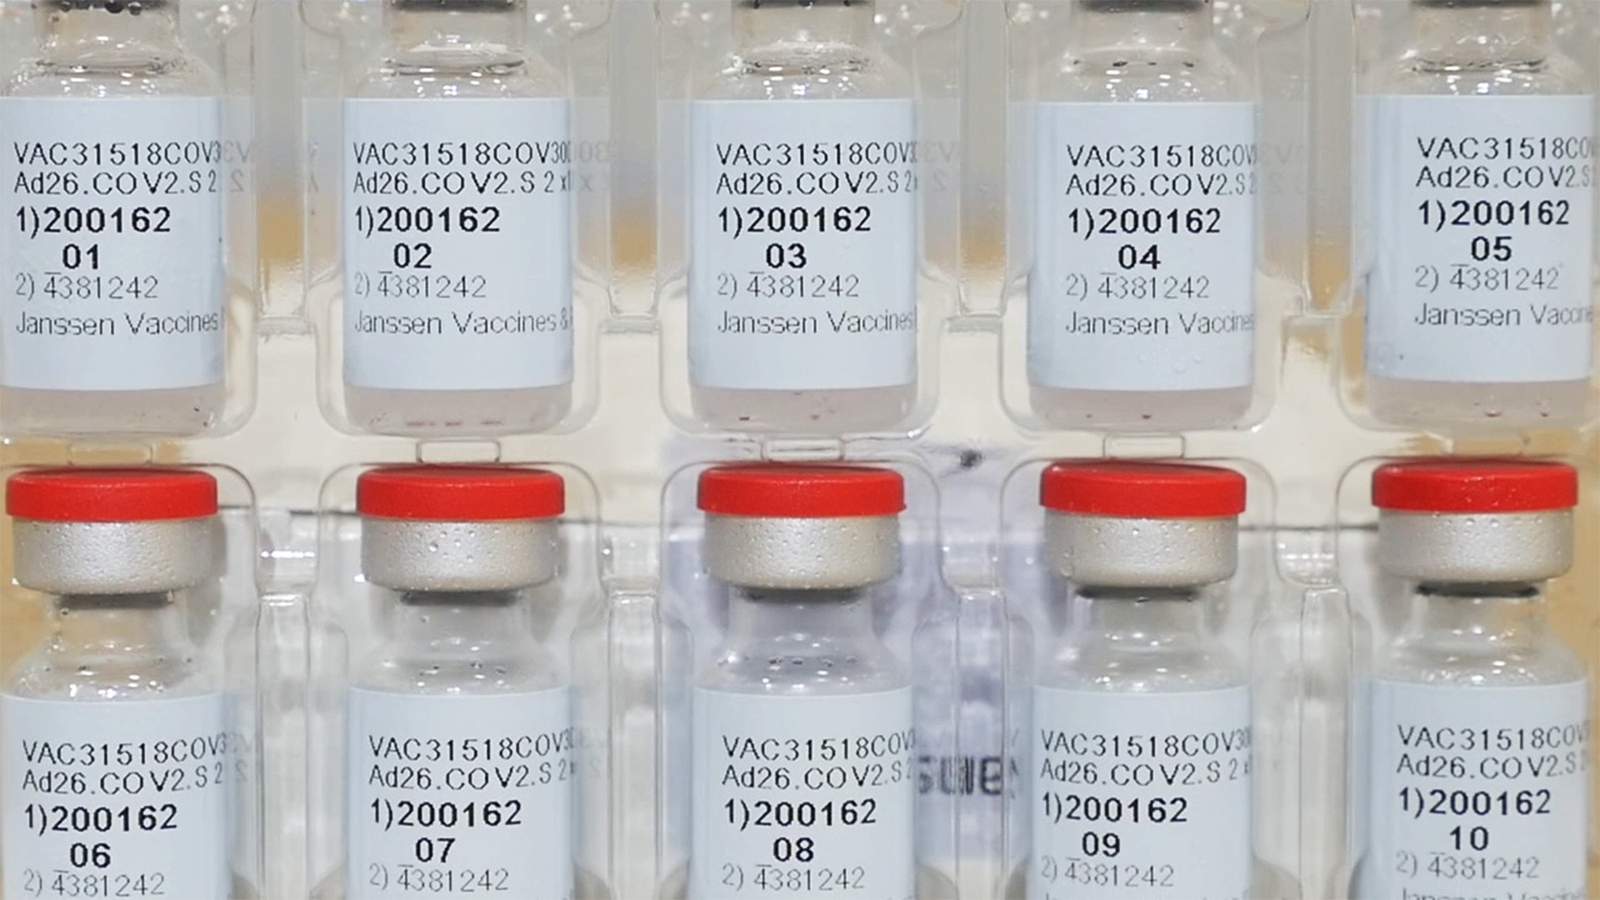 Canada clears Johnson & Johnson vaccine, first to approve 4